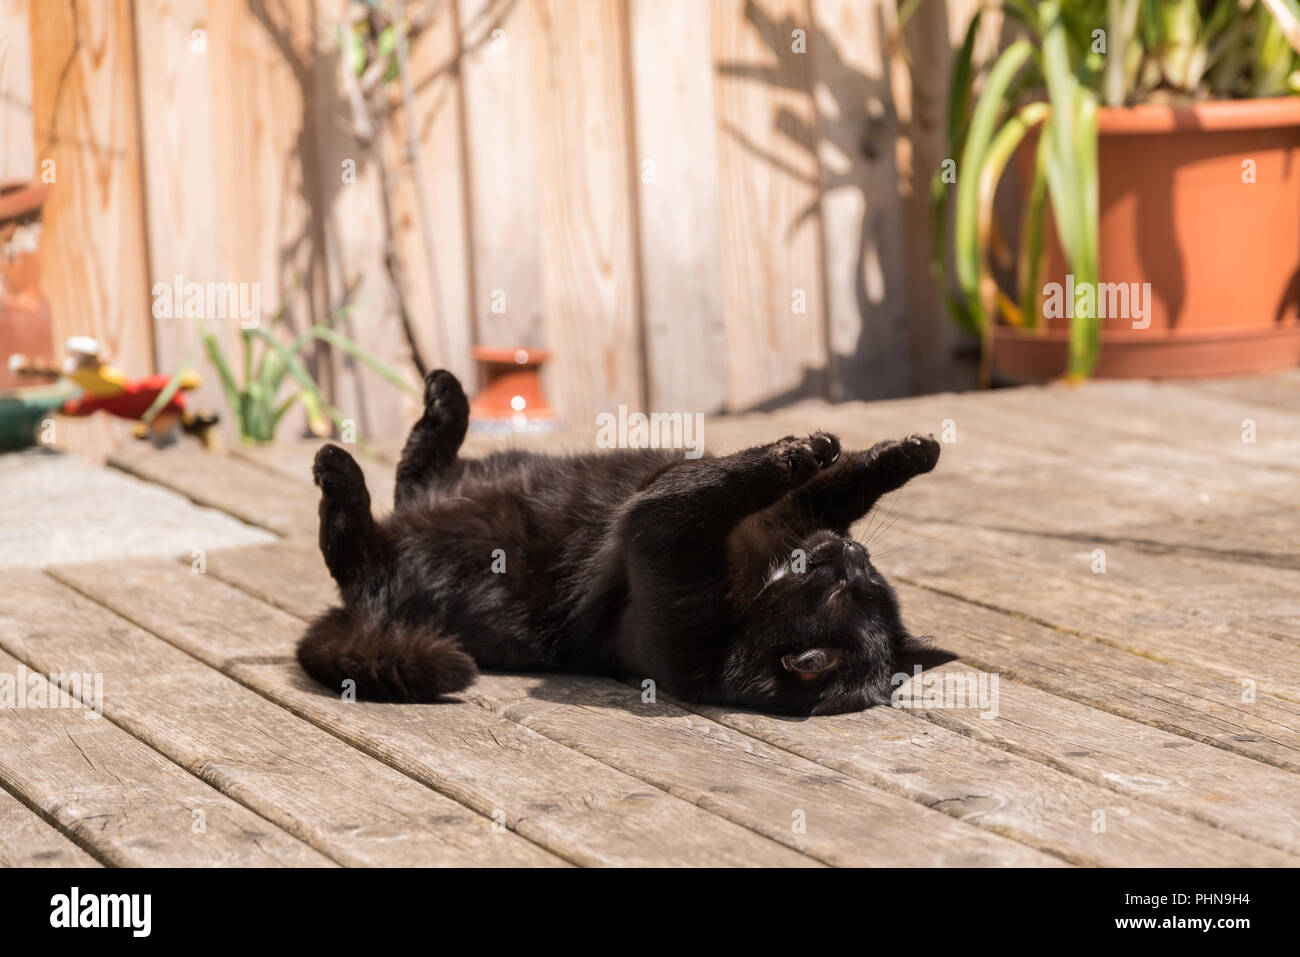 Black cat lies on the terrace revealed at the back Stock Photo